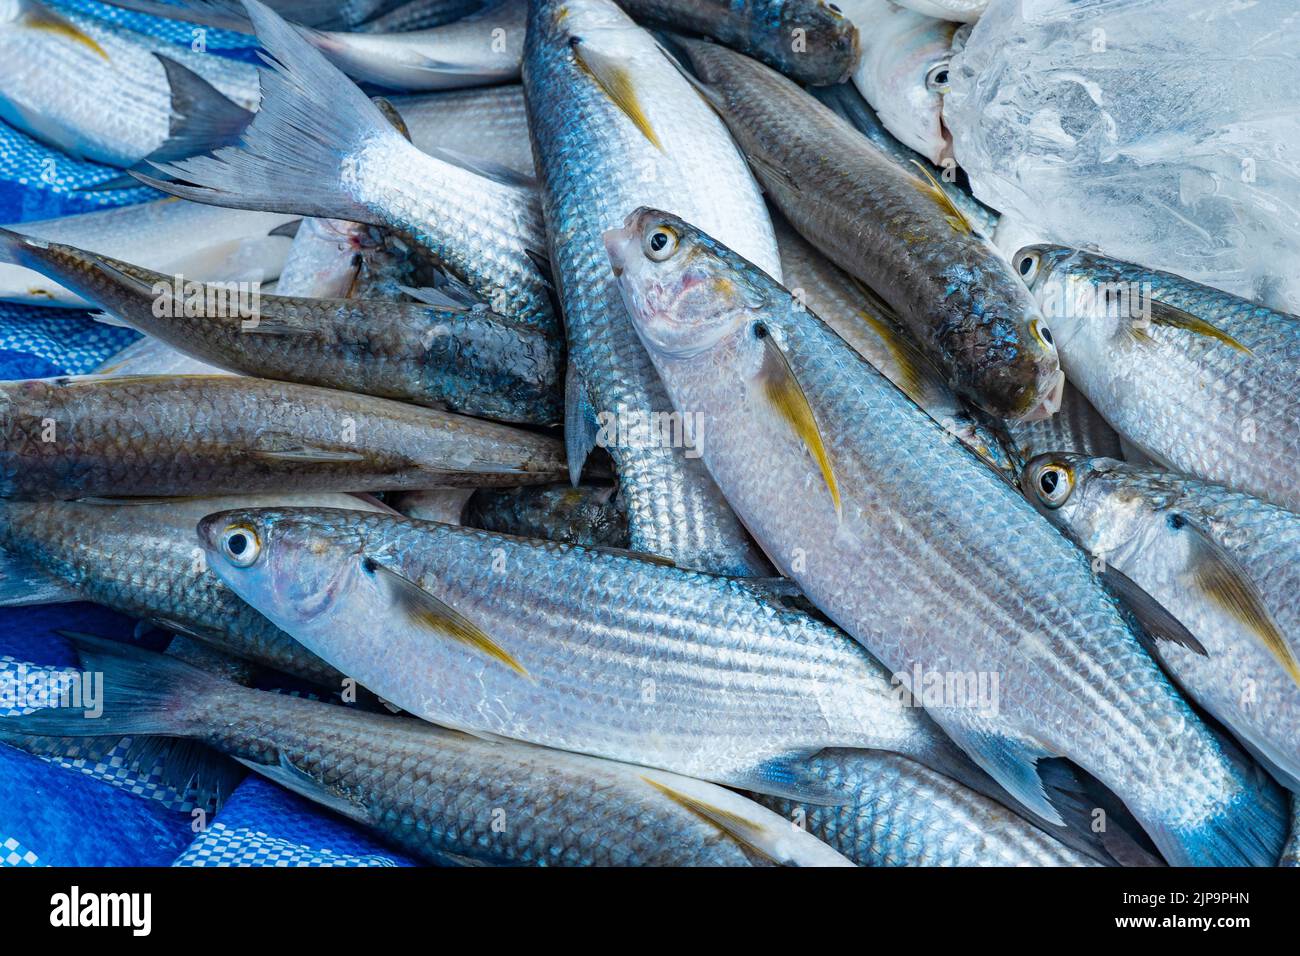 A mullet fish laying on a blue tarp, freshly caught by fishermen in Thailand. Stock Photo